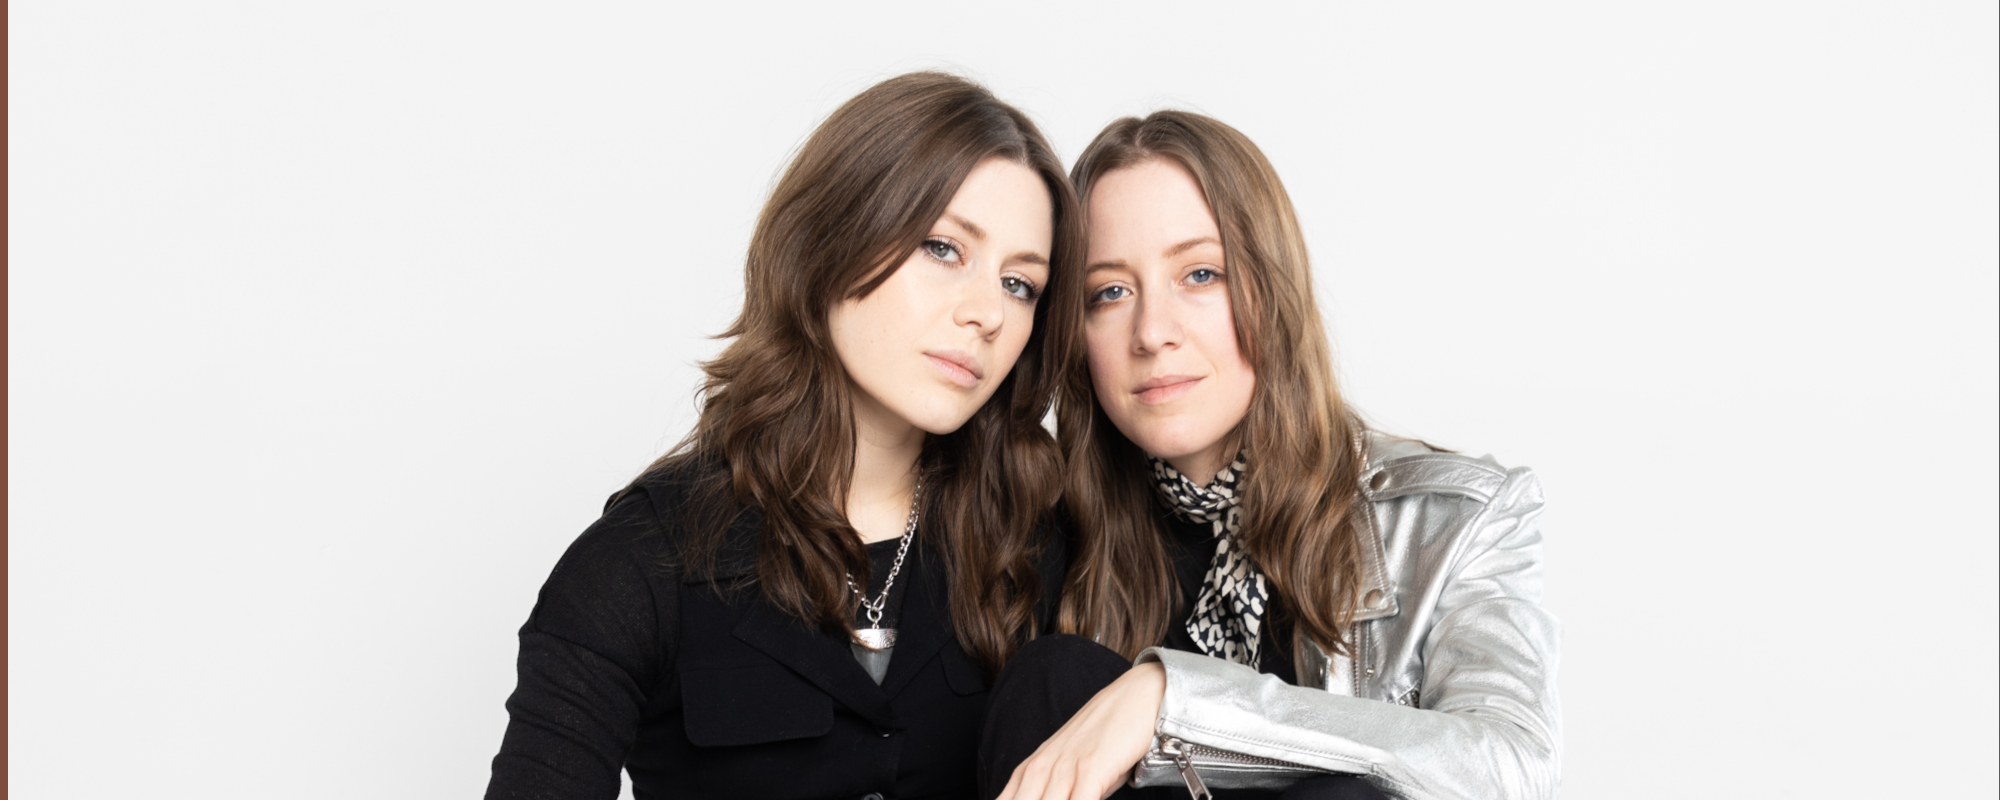 Larkin Poe Maintain Sisterly Bond on ‘Blood Harmony’—“Self-Reliance is Really the Backbone of What We’ve Built”